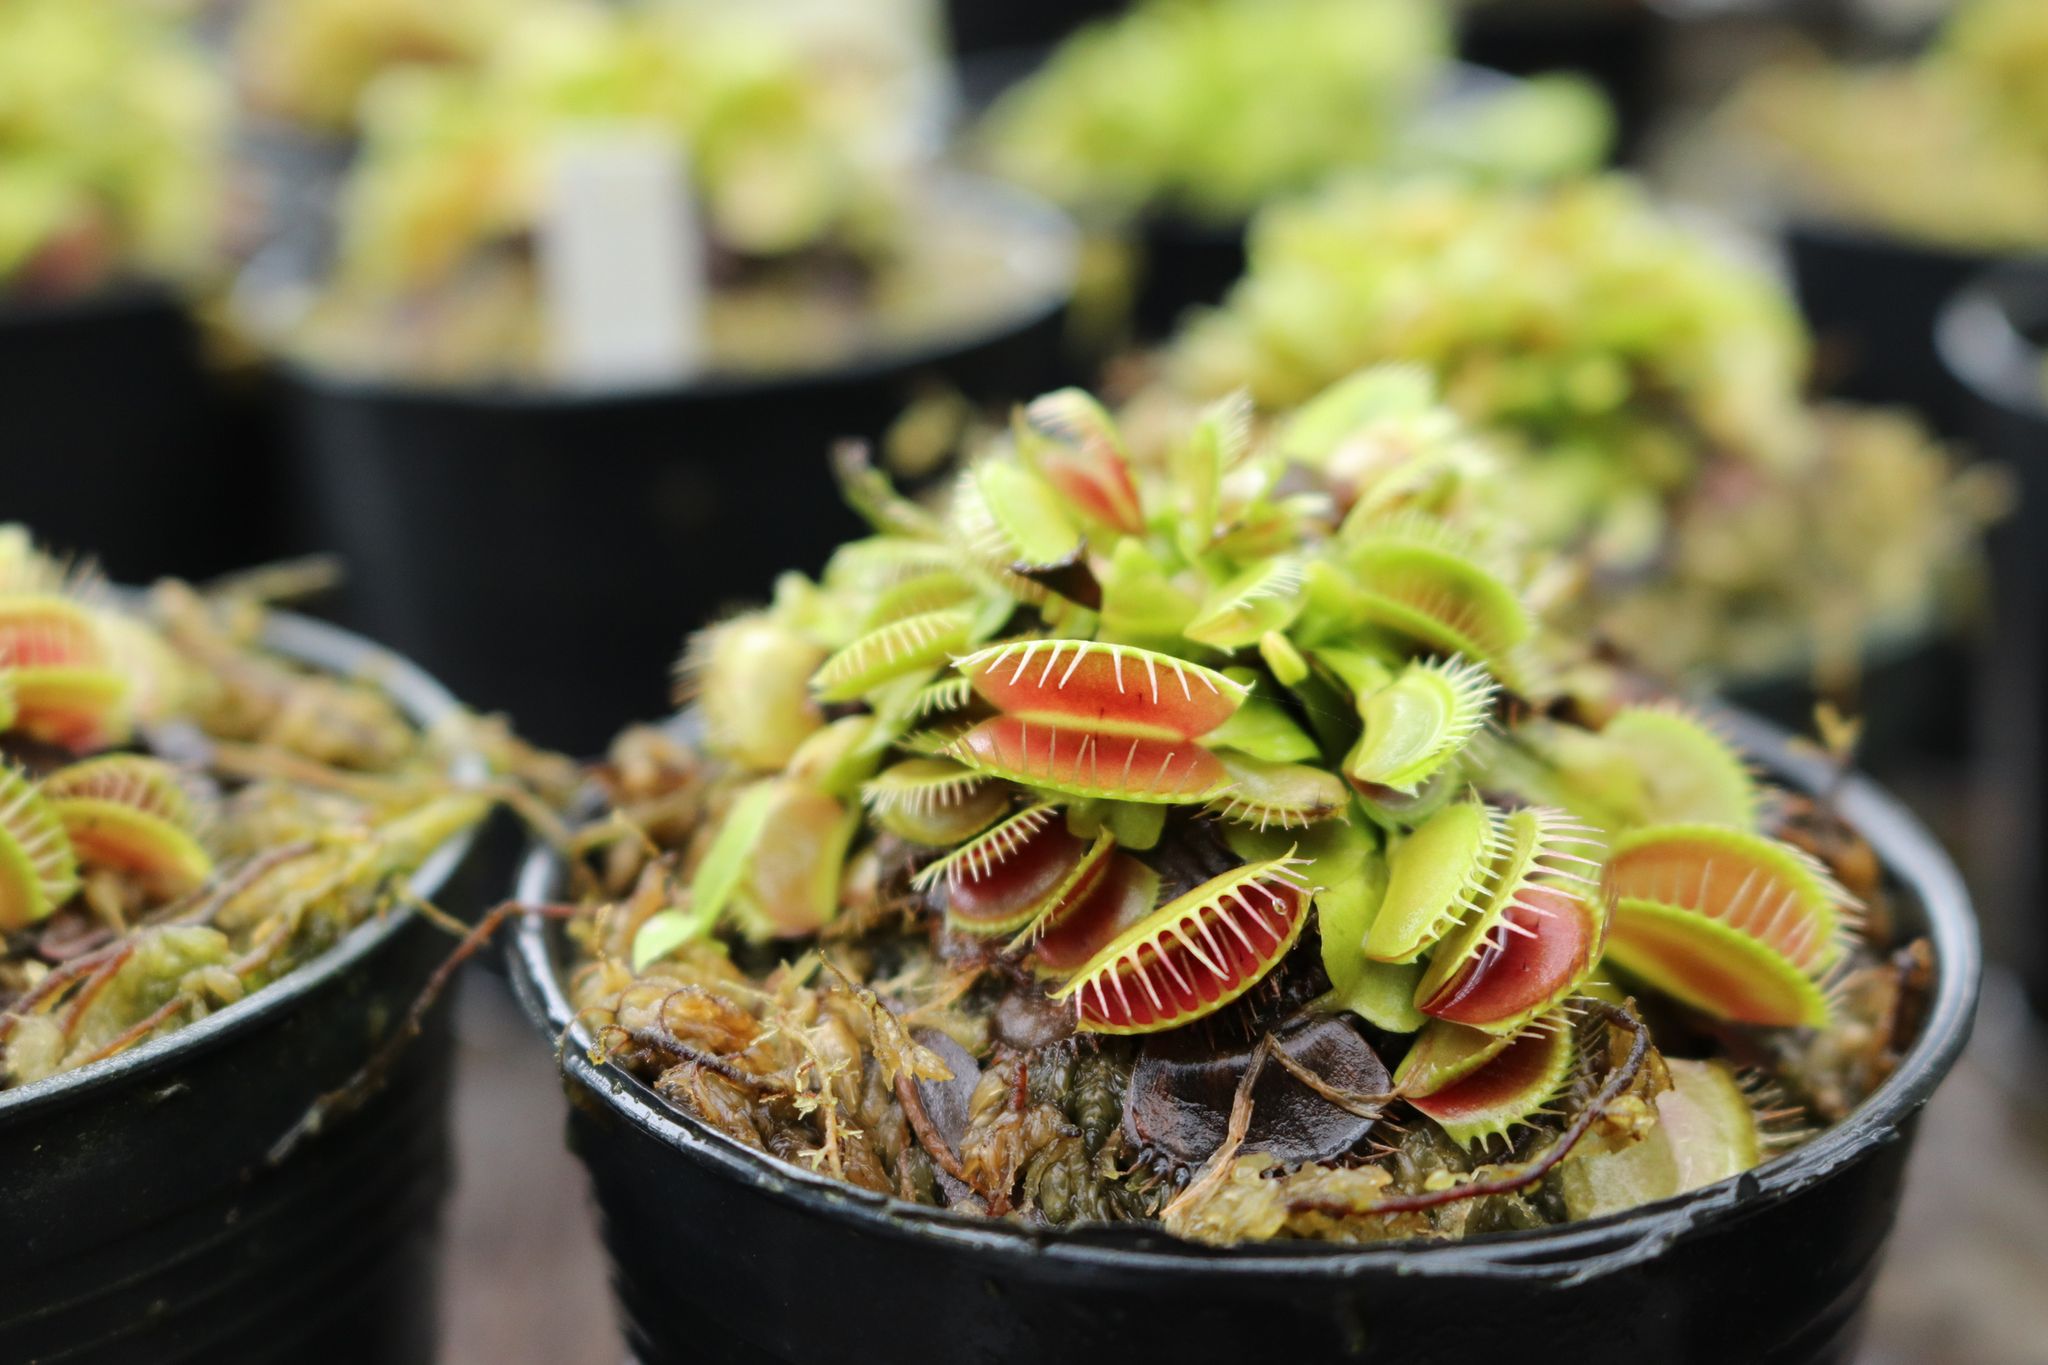 Venus flytraps: Everything you need to know about growing them